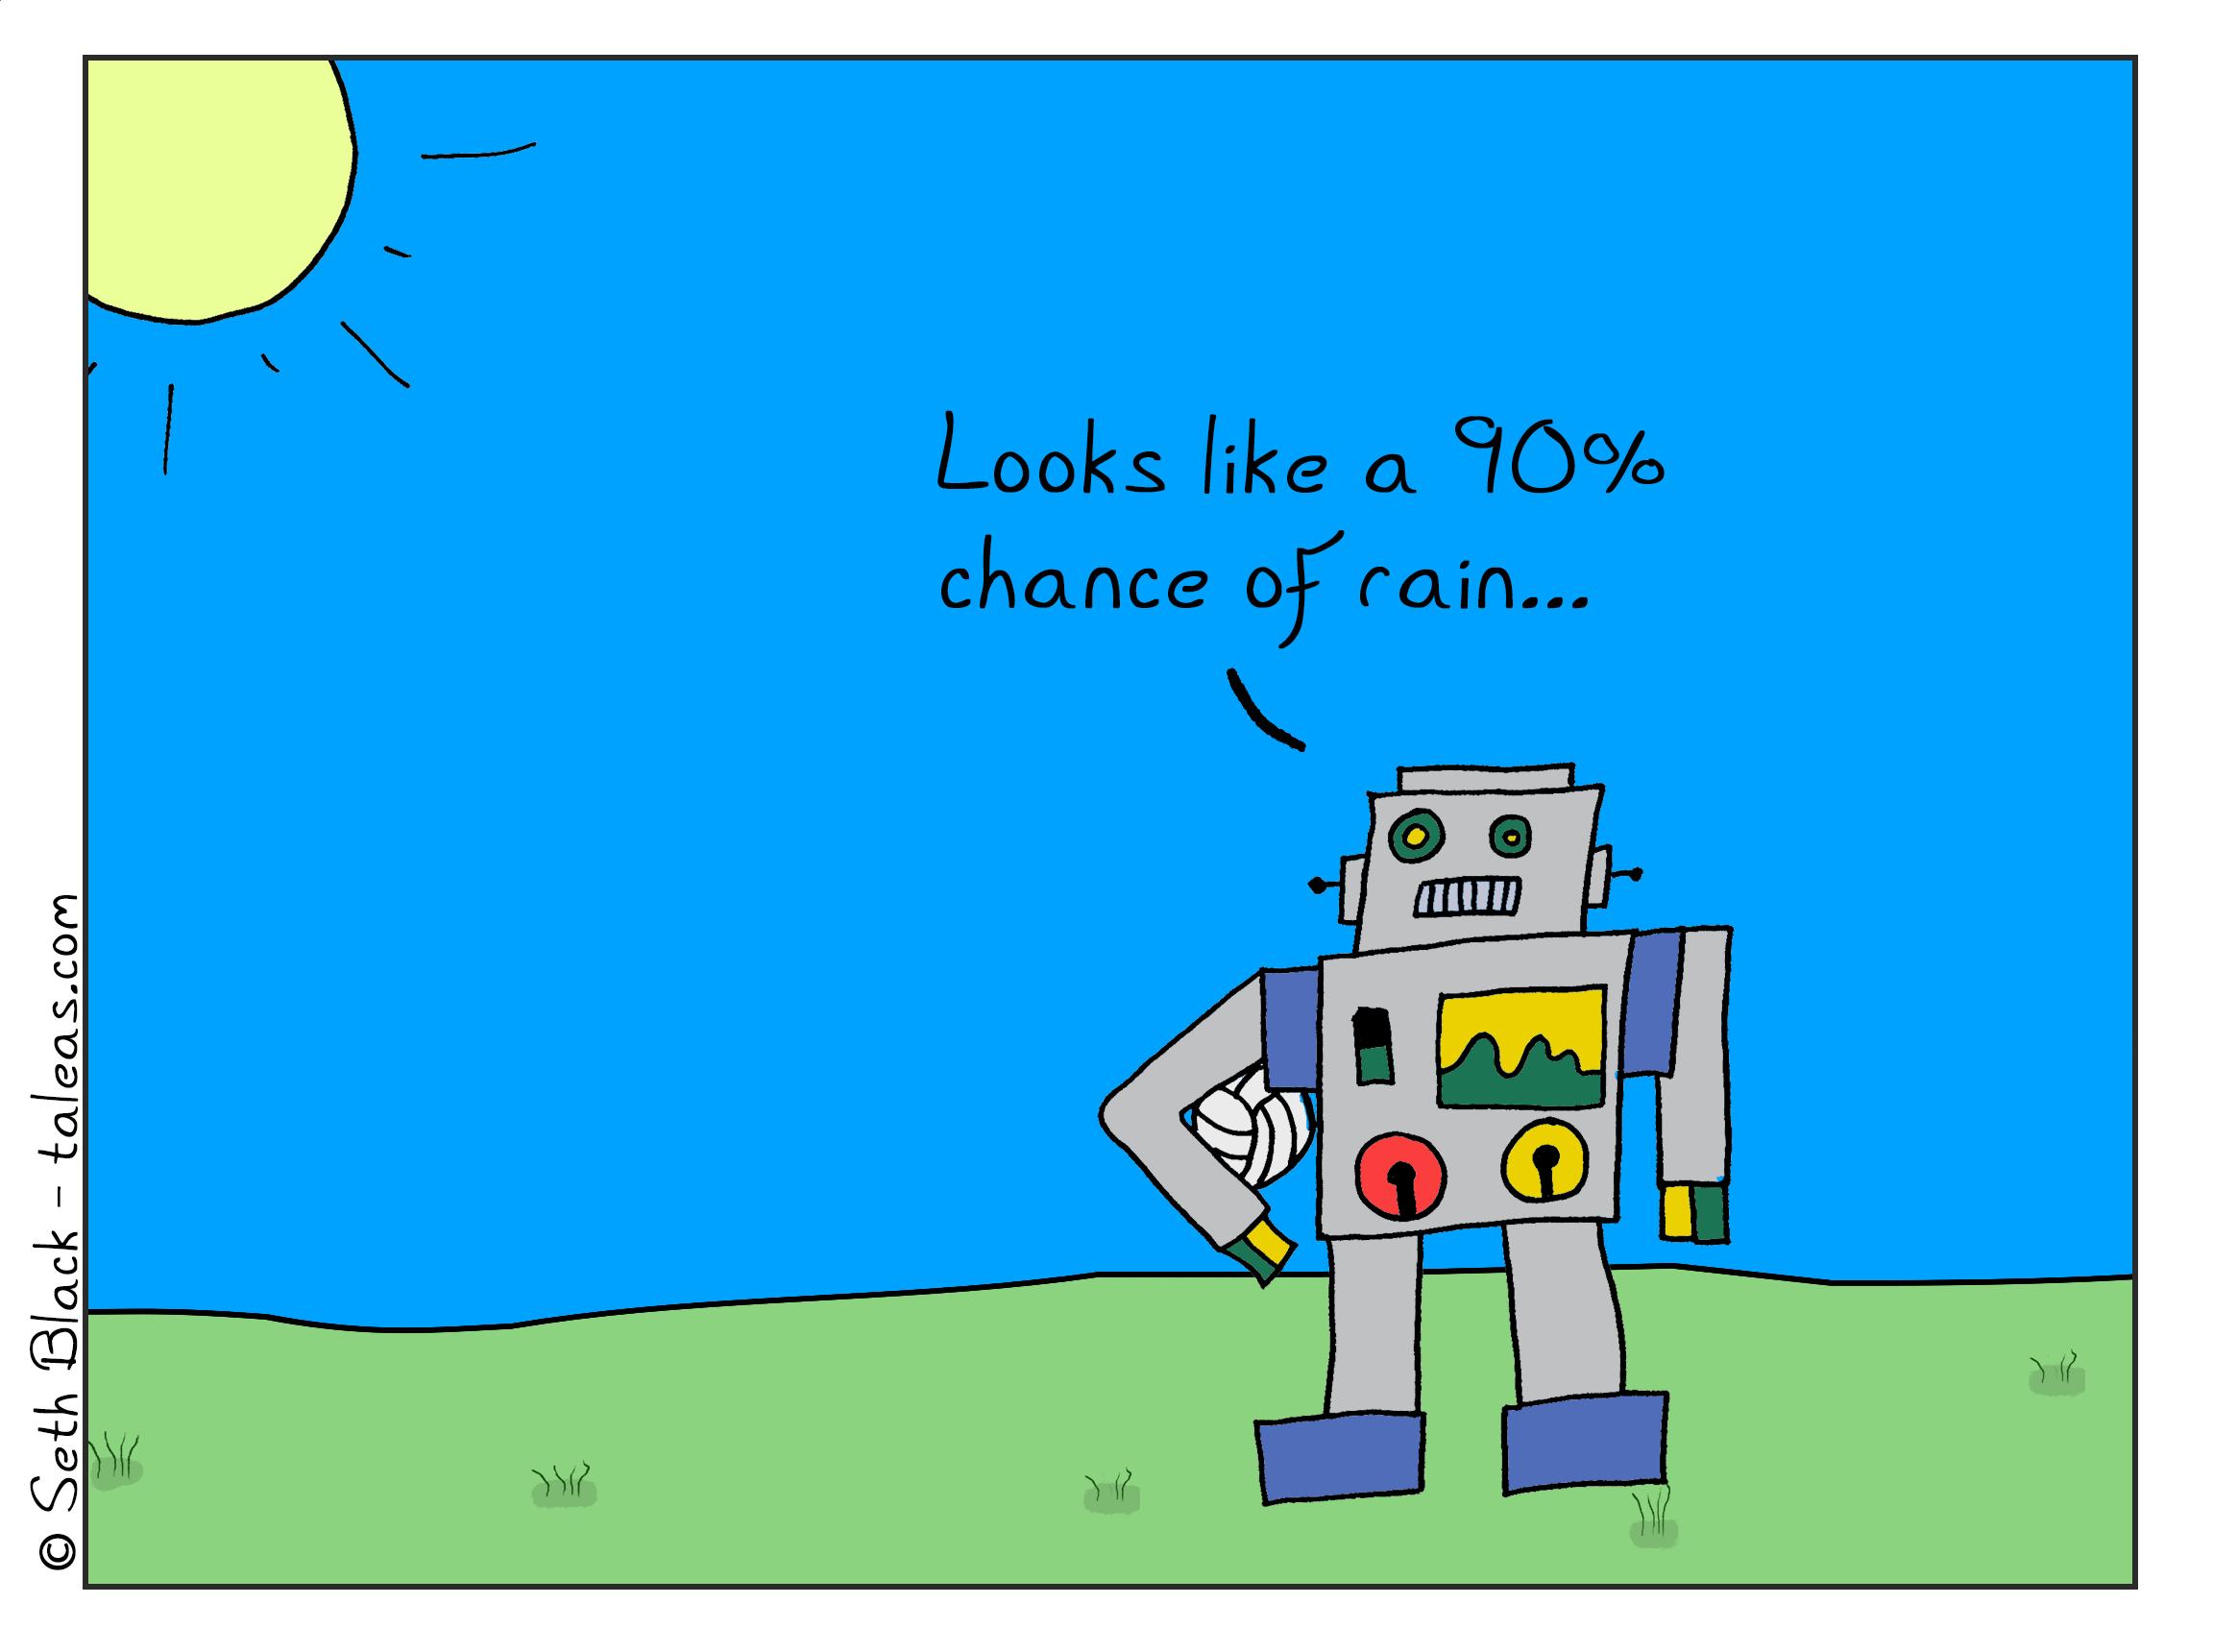 AI Bot standing out in a green field holding a volleyball, as the sun shines brightly in the sky: "Looks like a 90% chance of rain..."